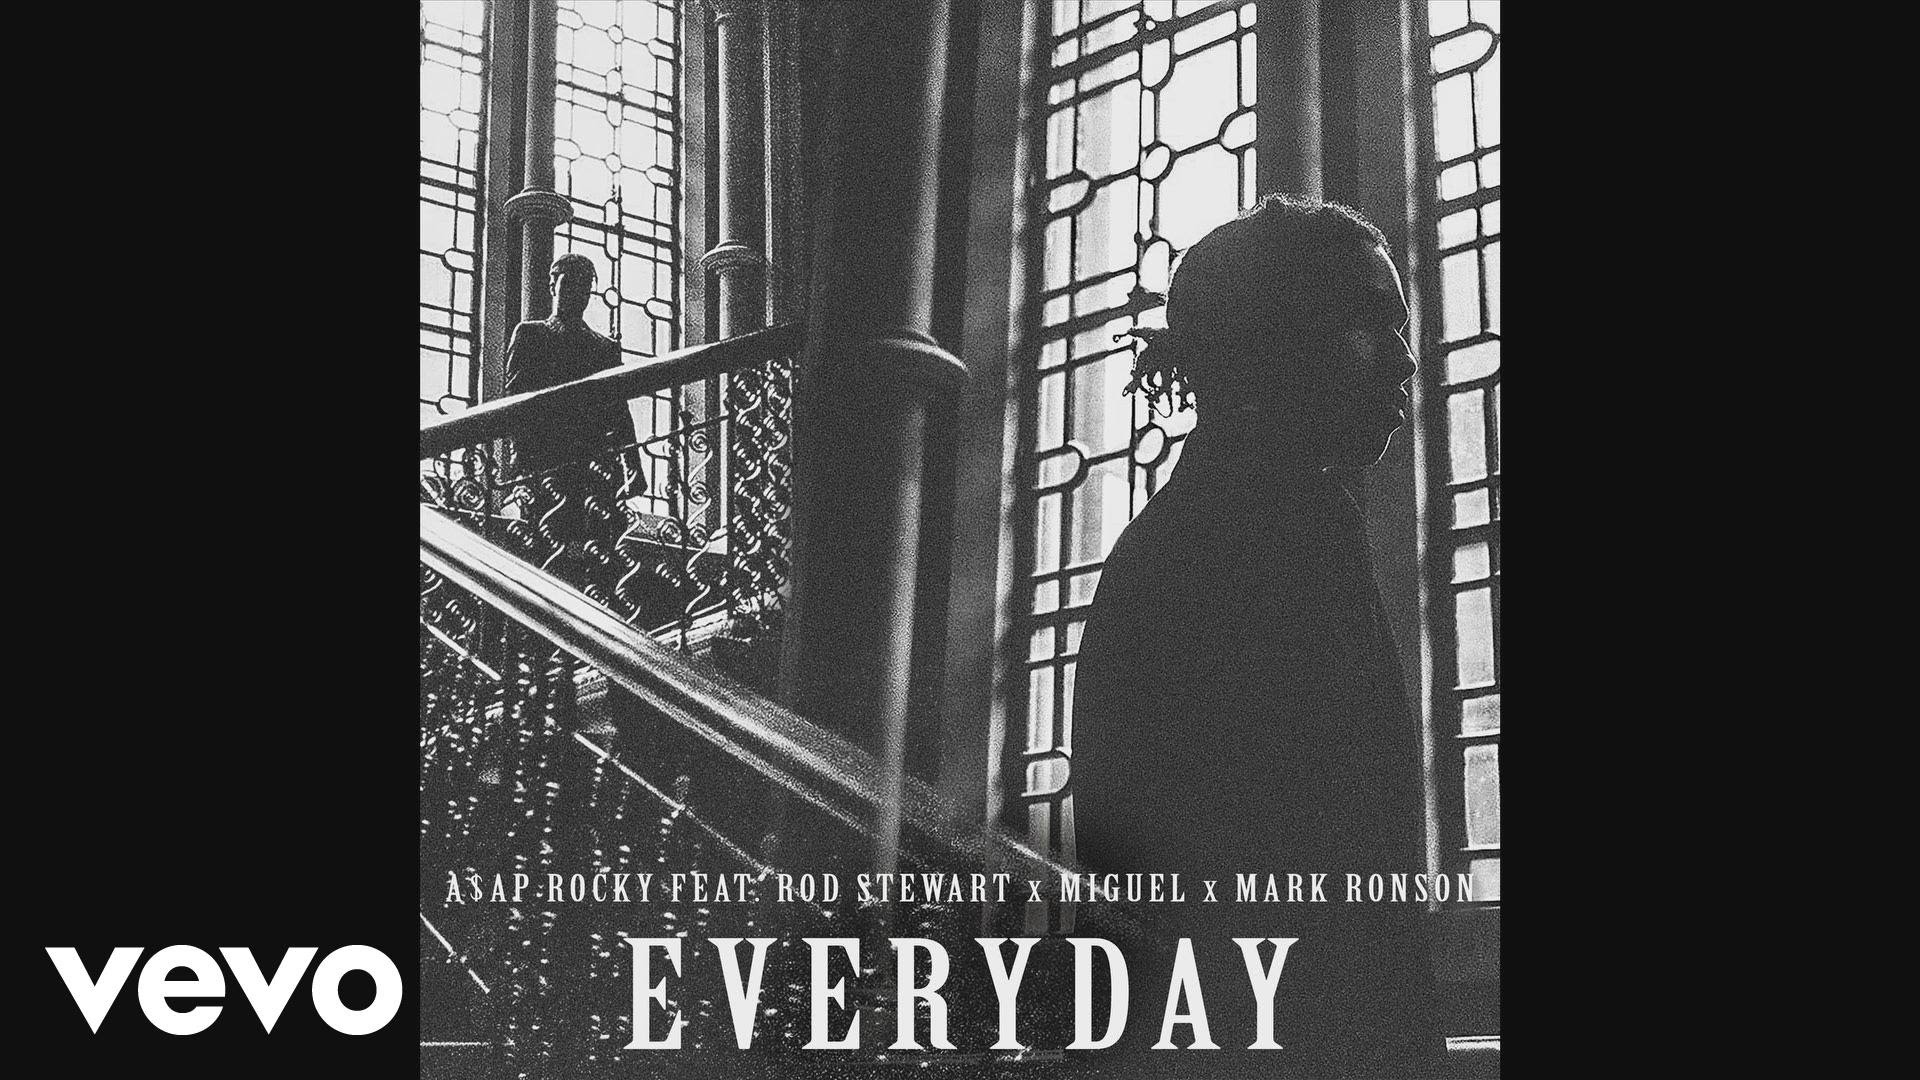 A$AP Rocky – Everyday (Audio) ft. Rod Stewart, Miguel, Mark Ronson